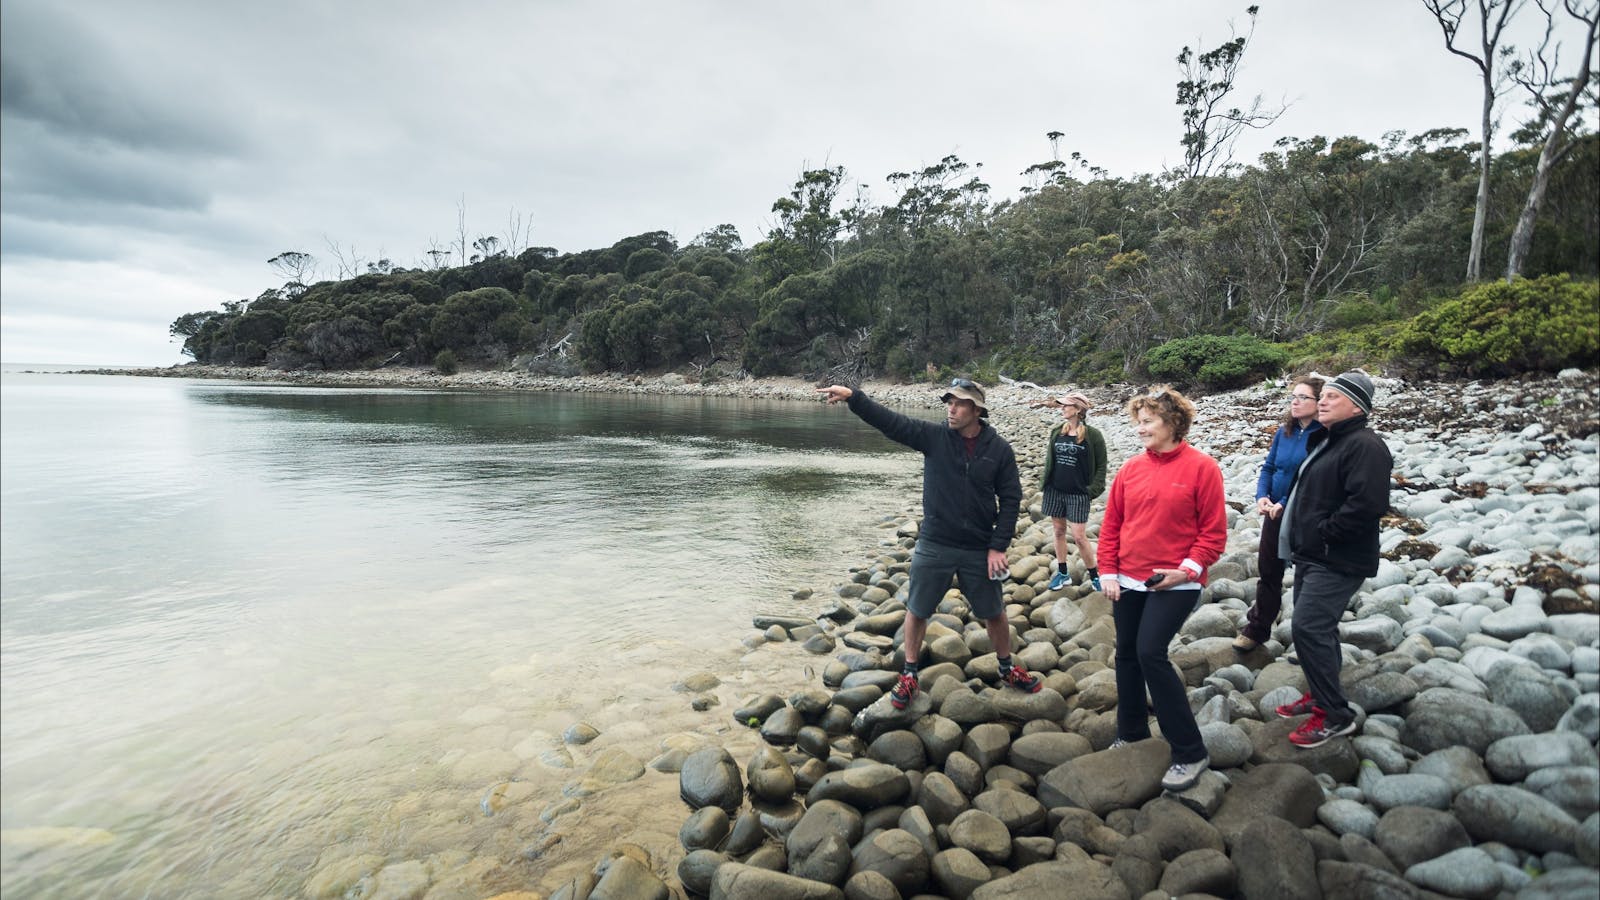 Stories of Tasmania's history, culture and environment are at the heart of every adventure.